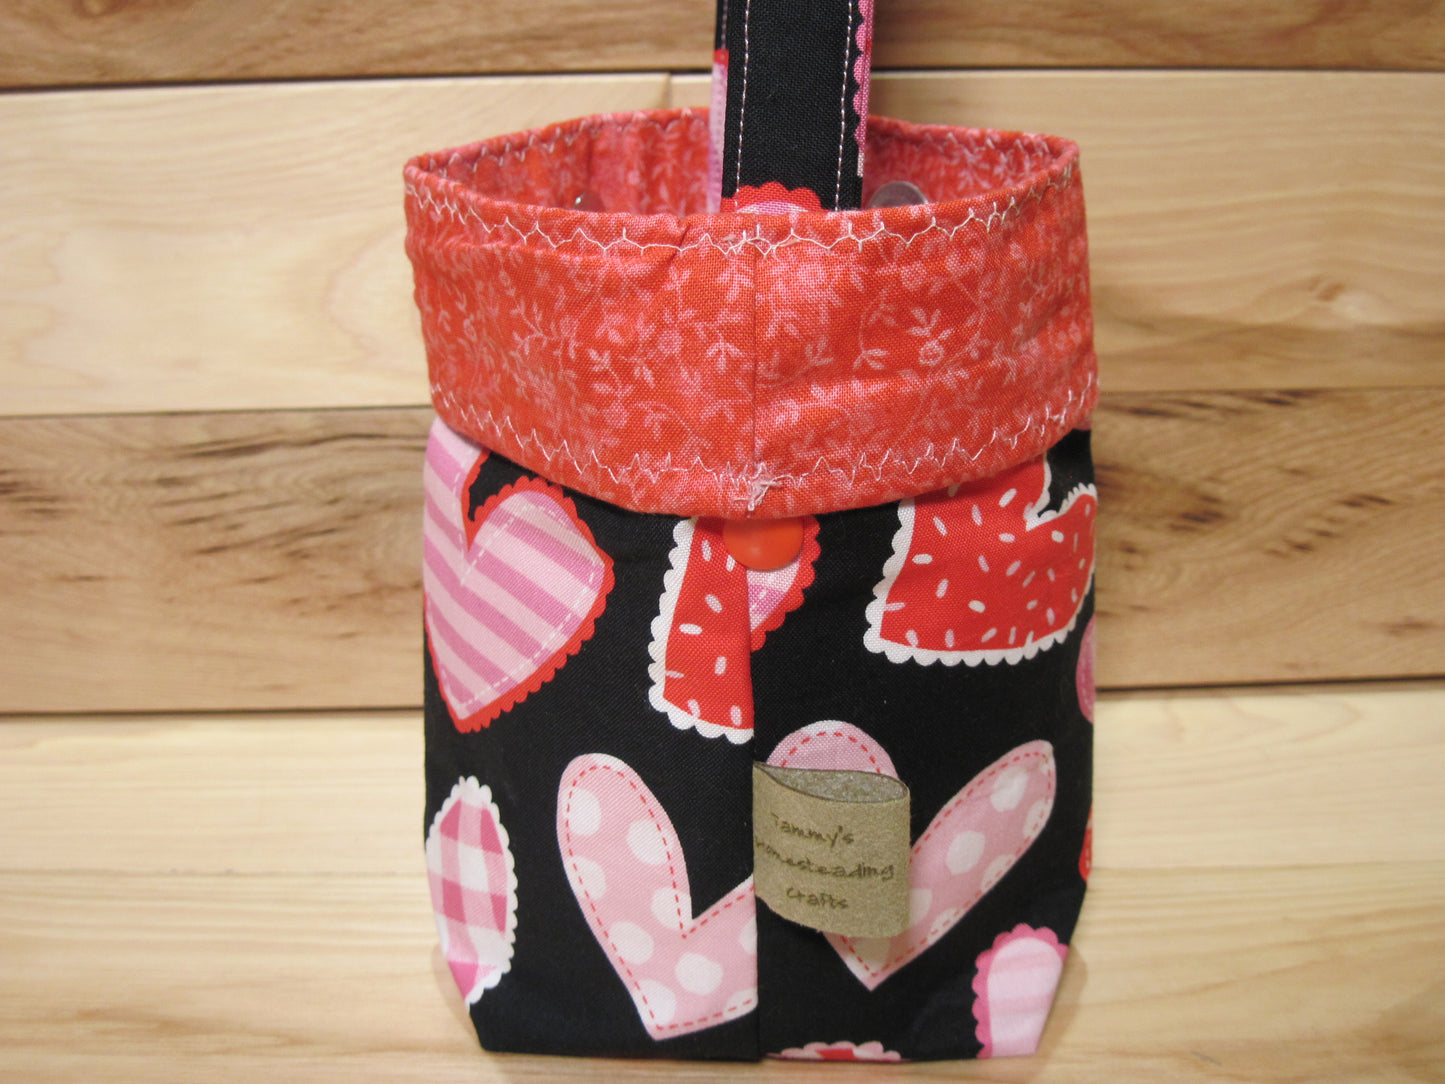 Wrist-Yarn Bag Valentine's Day Hearts w/ red removable snap handles & magnet closures